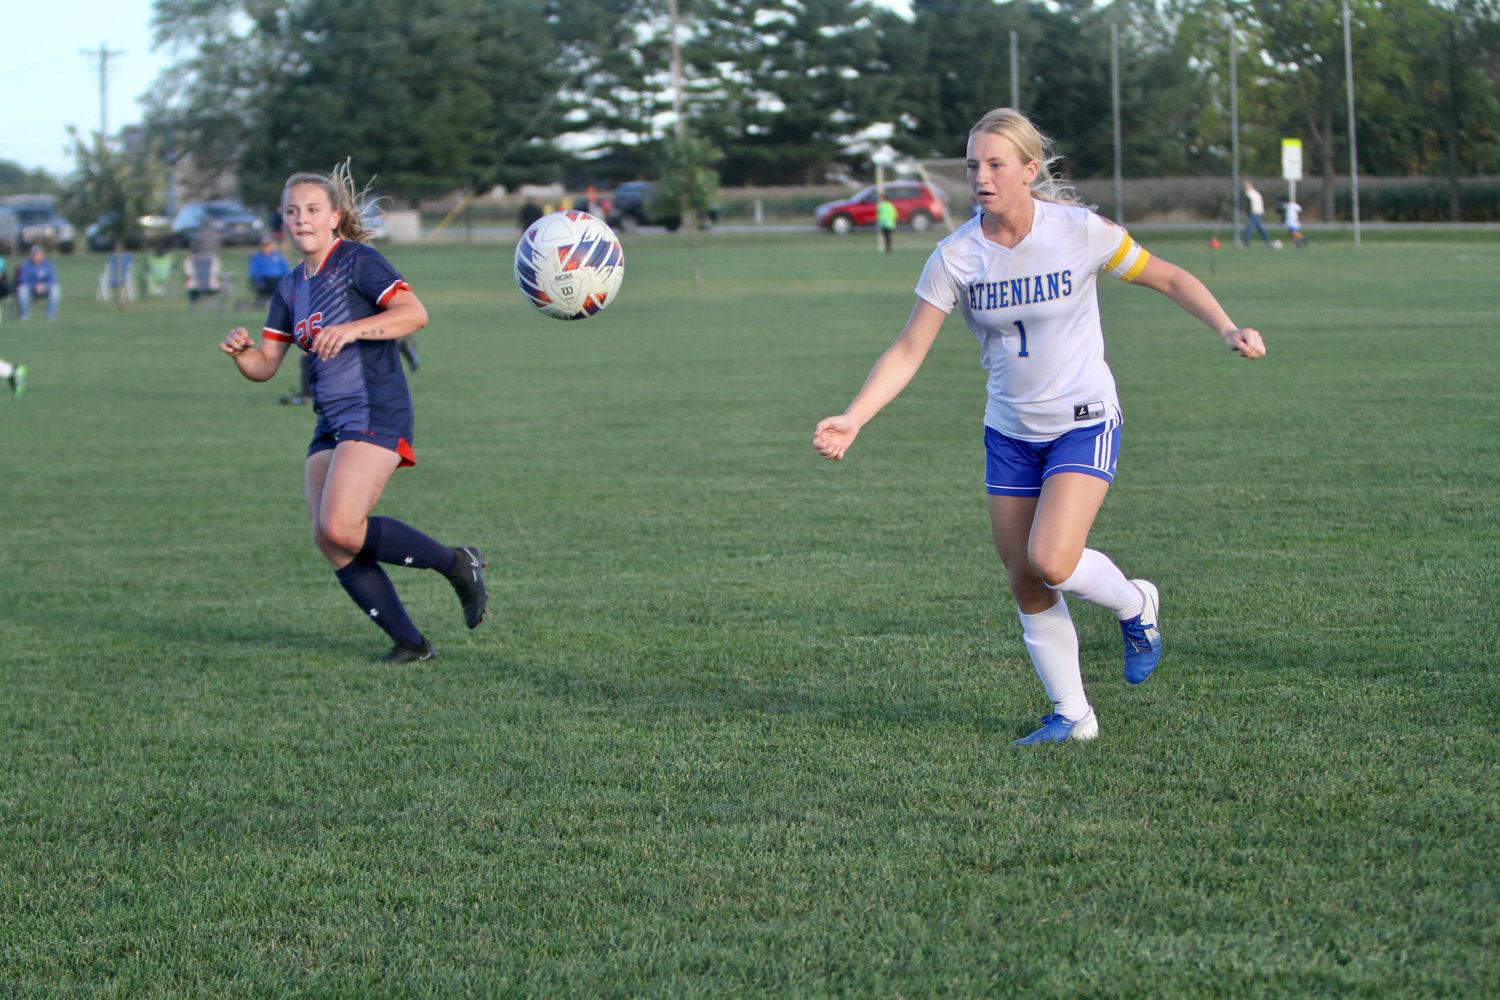 Jayda Roach scored the lone goal for the Athenians in the first half of play.